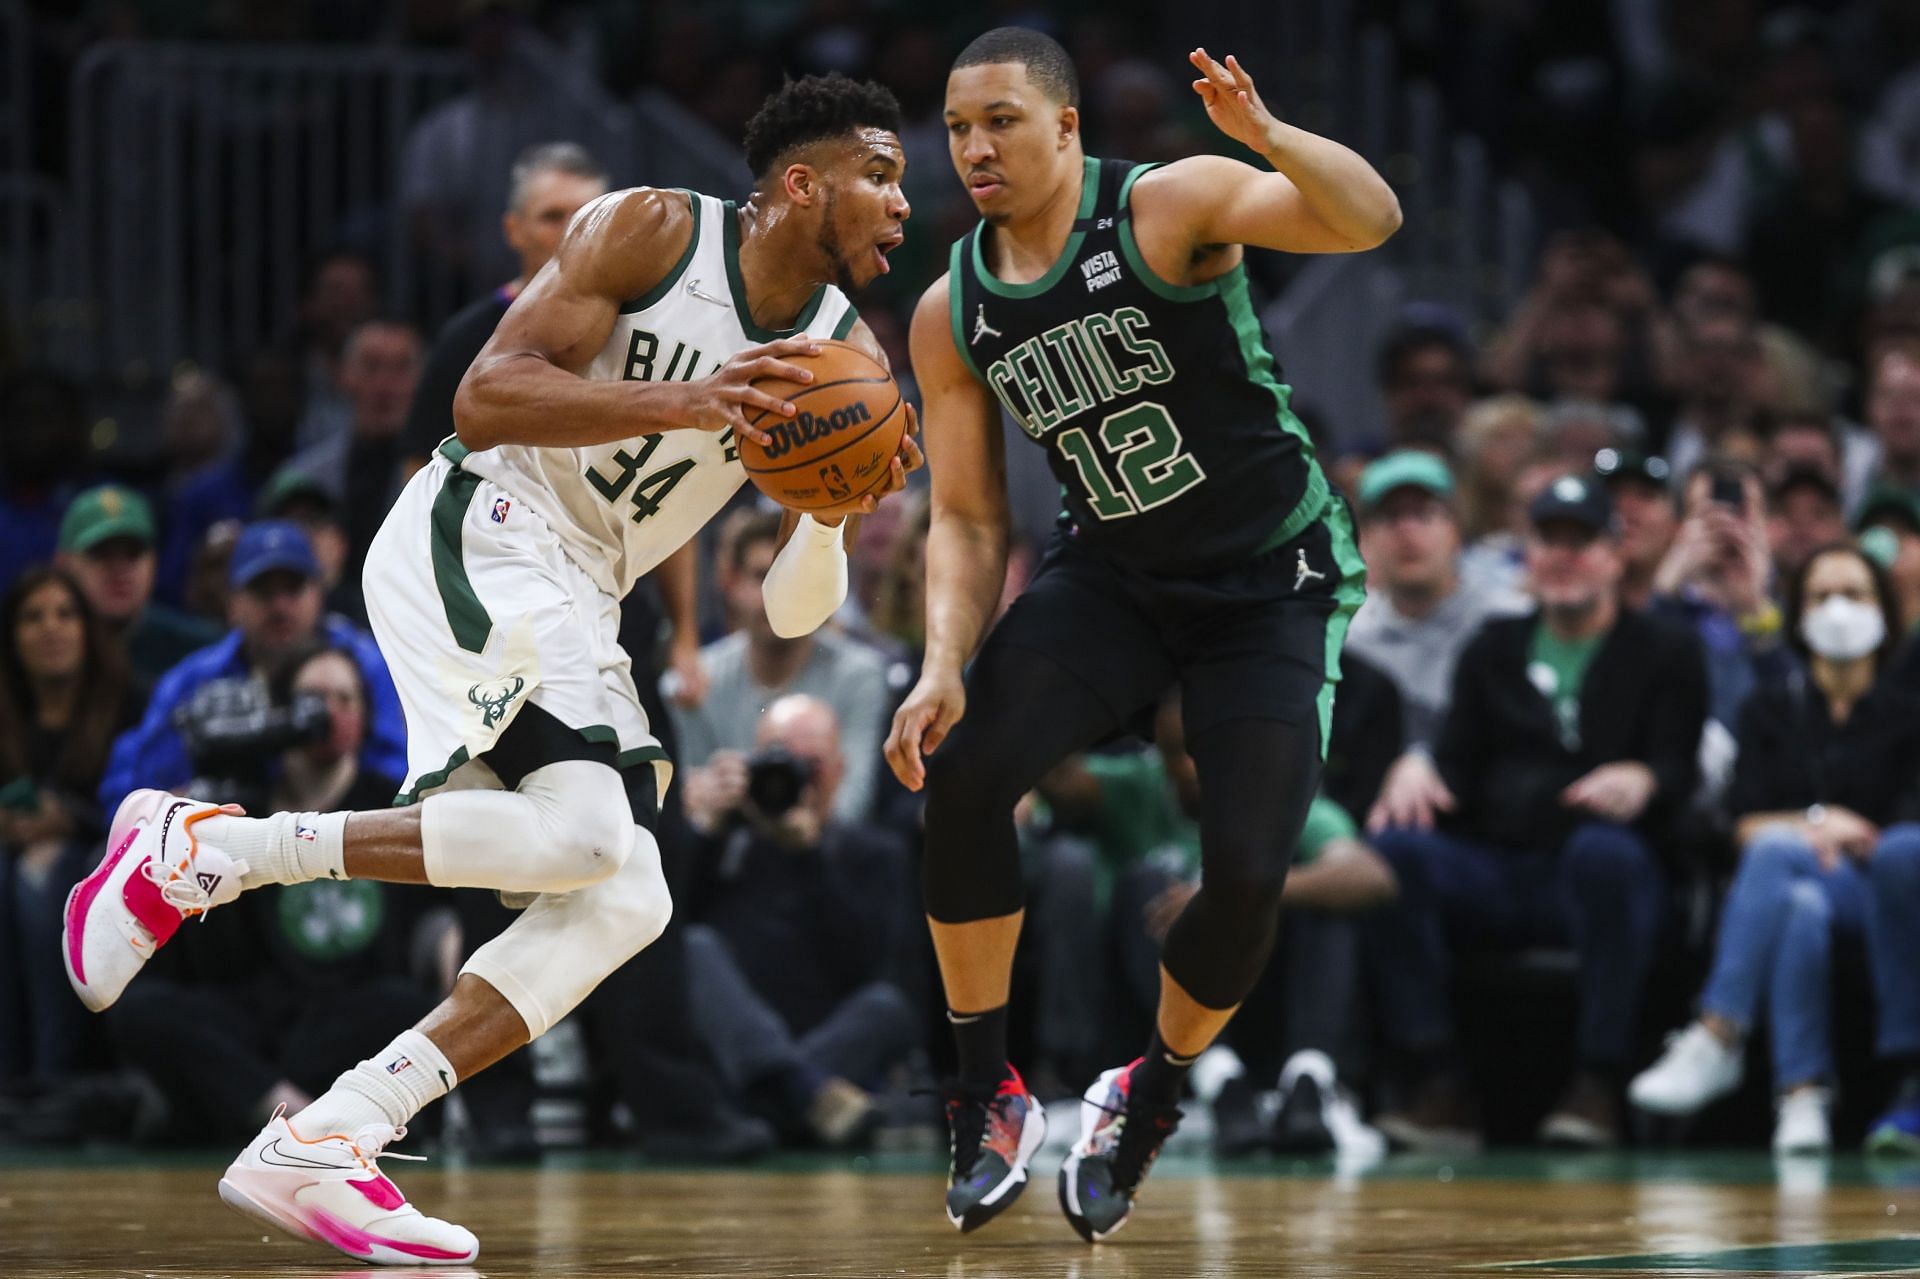 Giannis Antetokounmpo was just too strong and too fast for the Celtics to deal with.